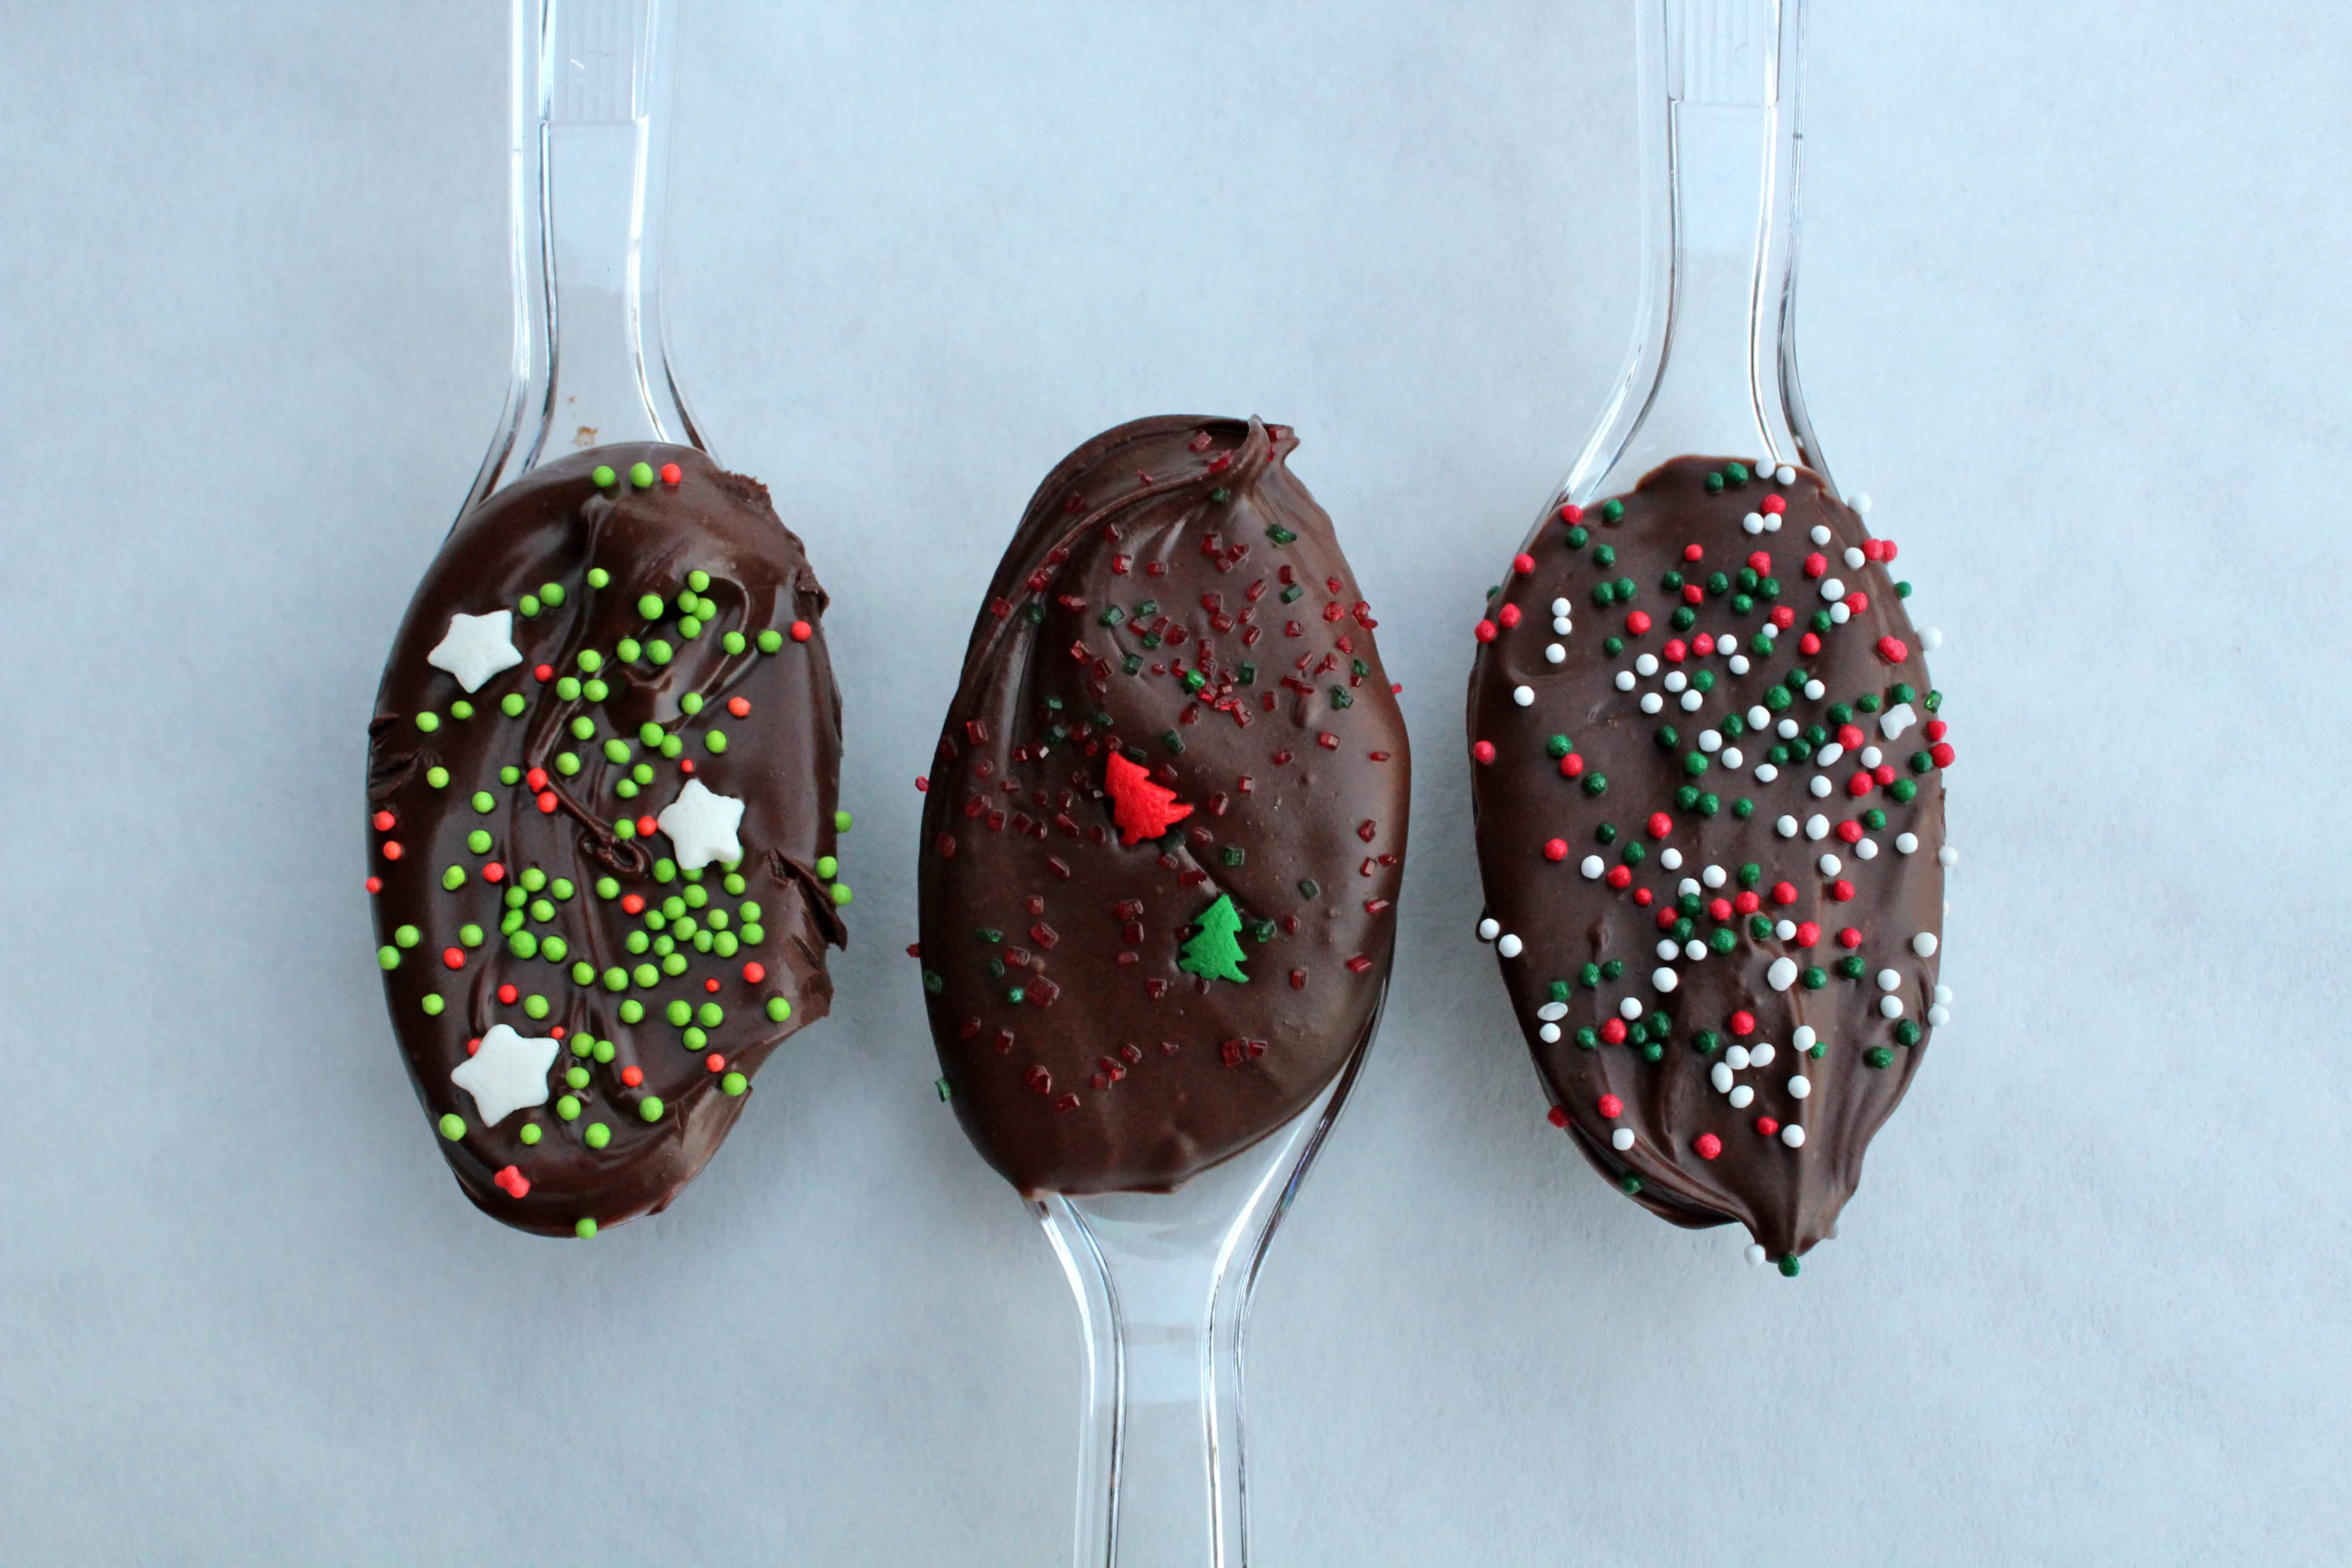 Chocolate and sprinkle cocoa stir-in spoons